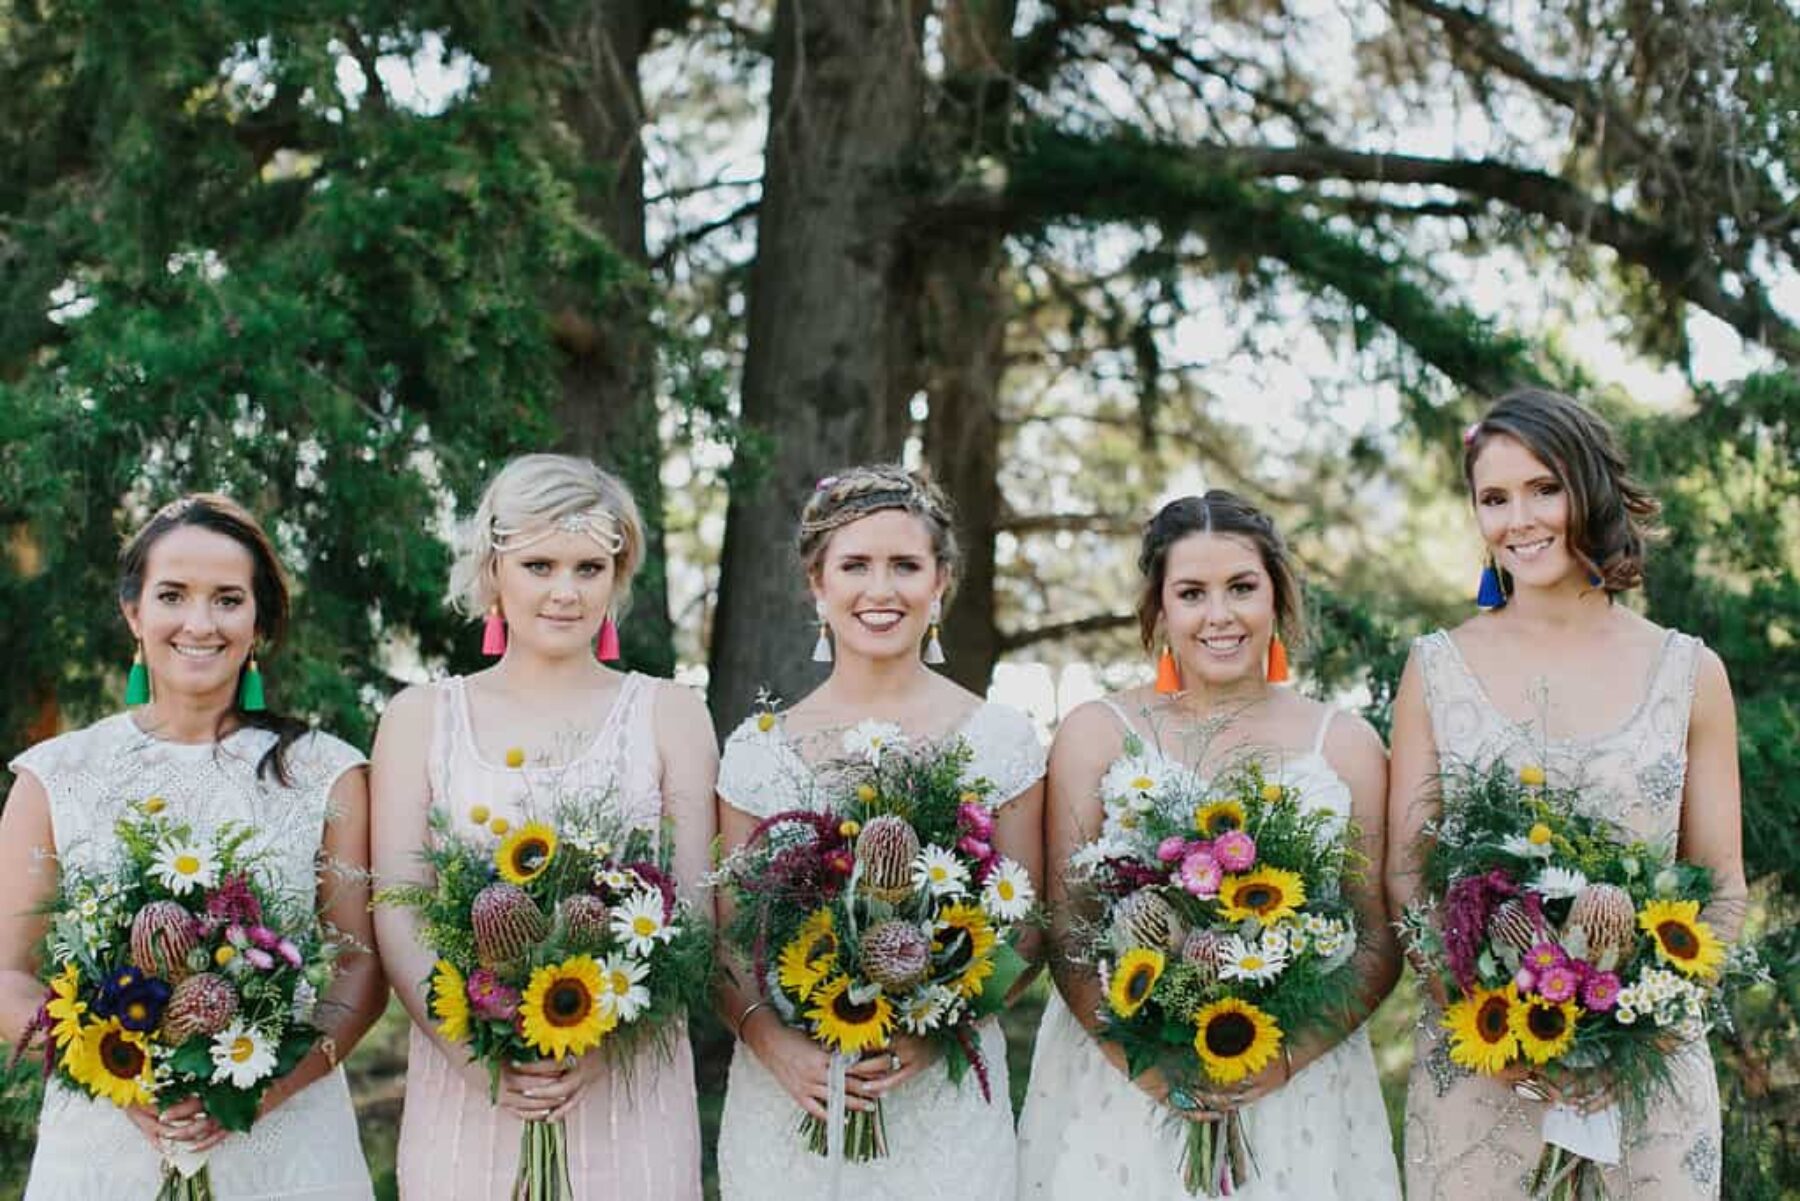 colourful bridesmaid bouquets with sunflowers, daisies and banksia